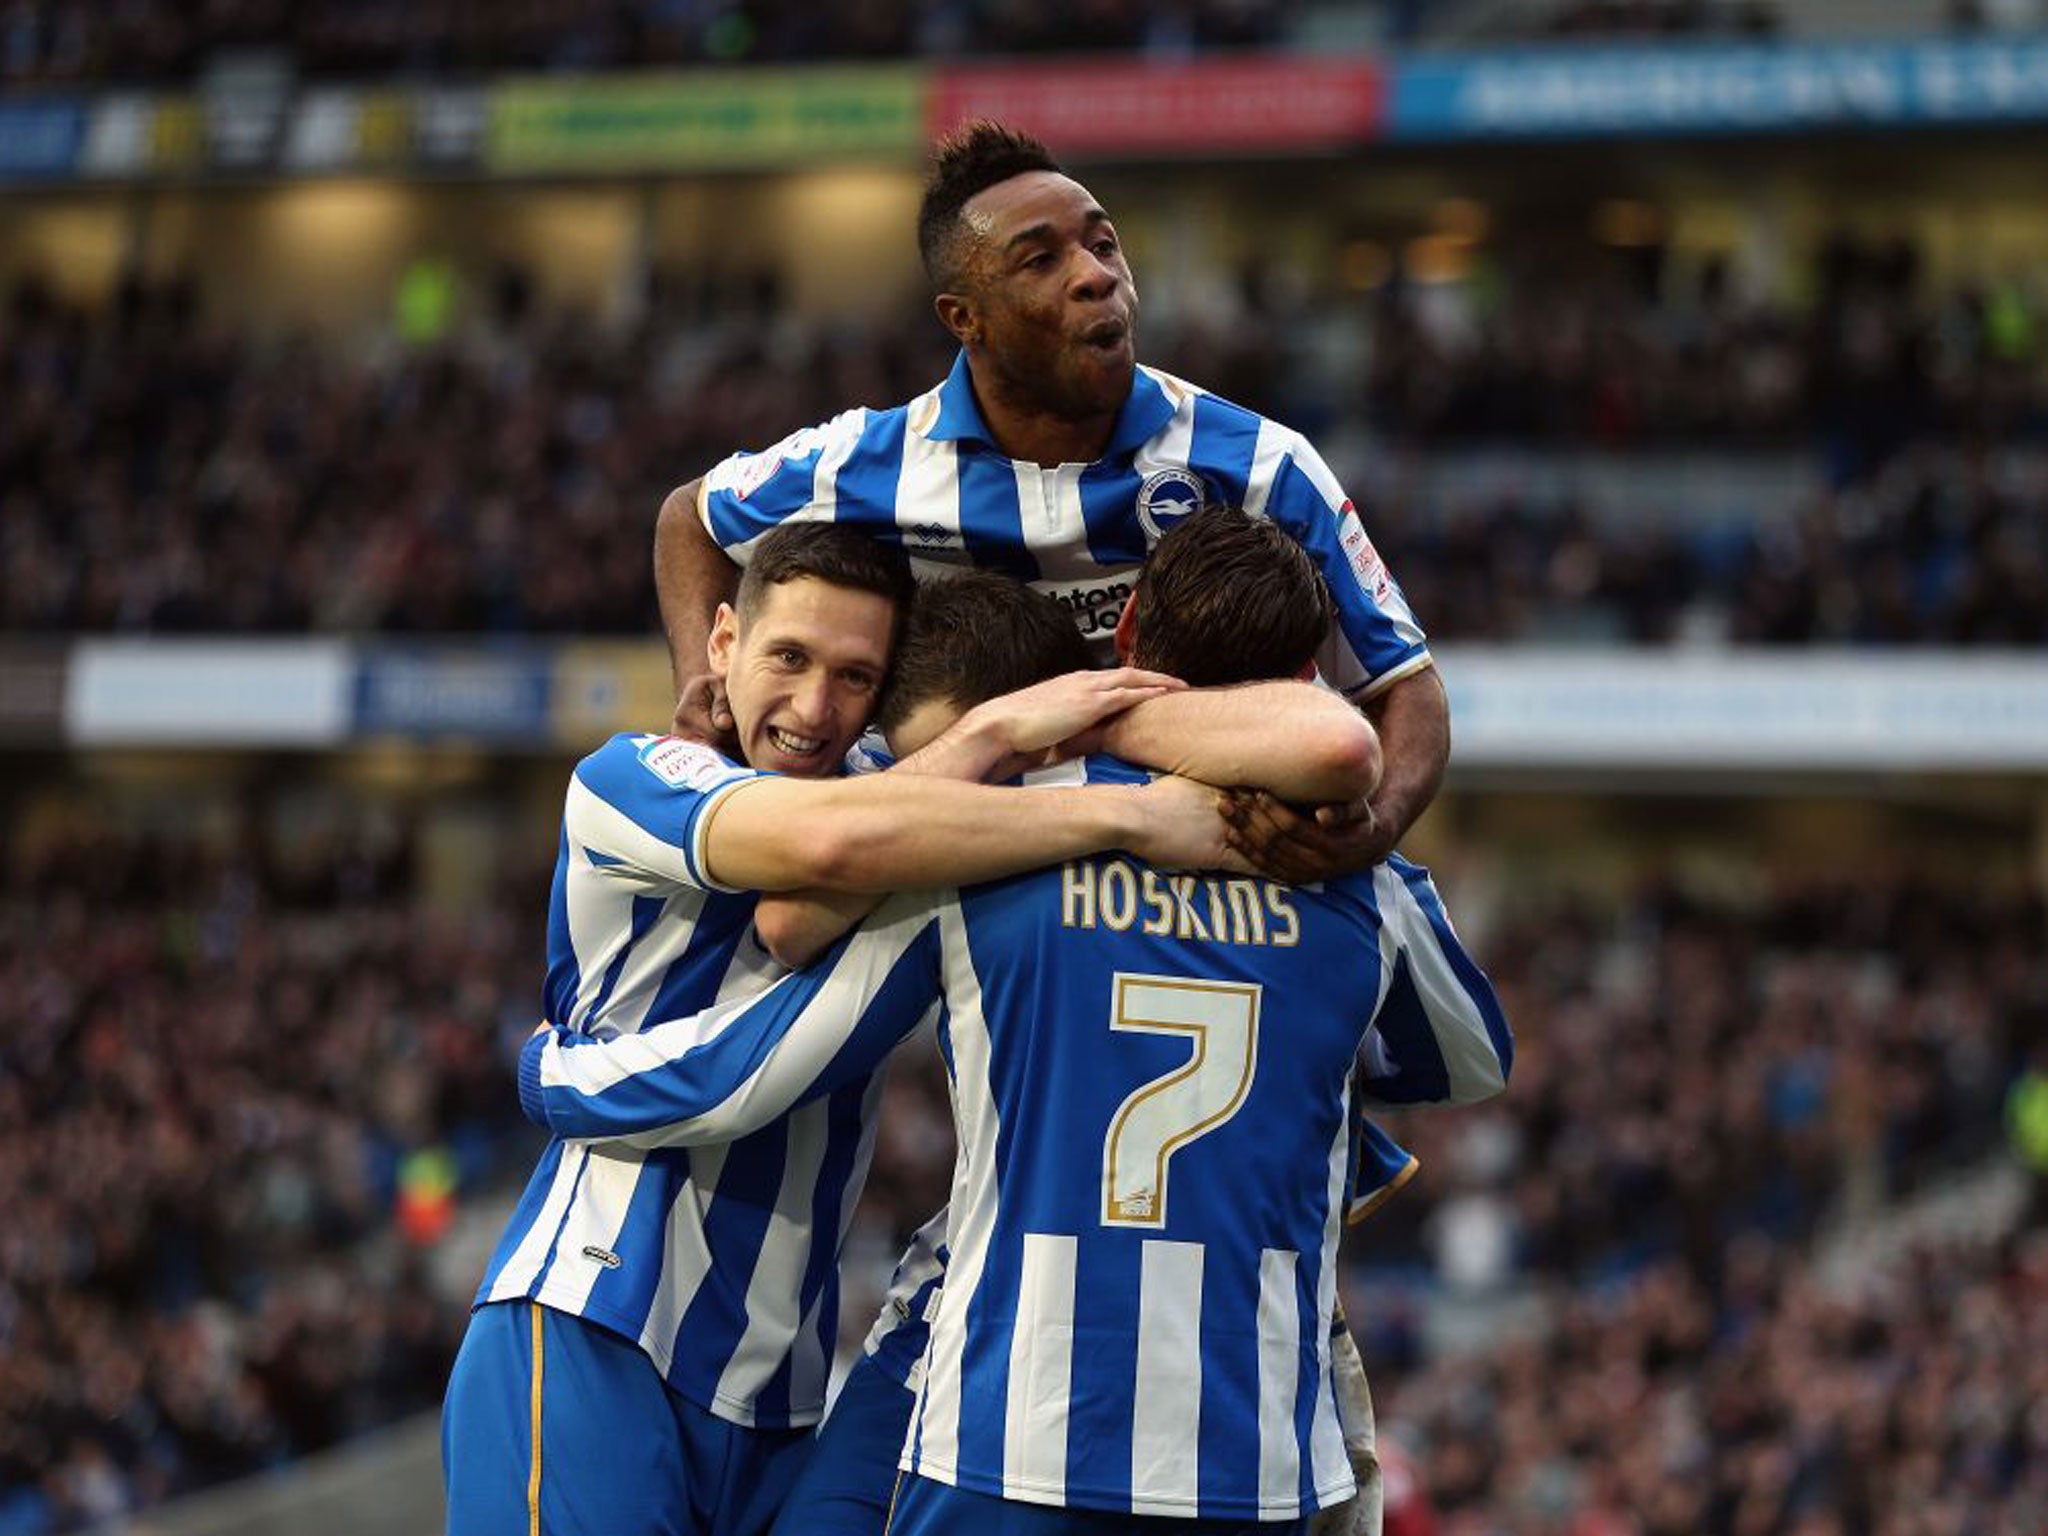 Will Hoskins is mobbed after scoring for Brighton on Saturday